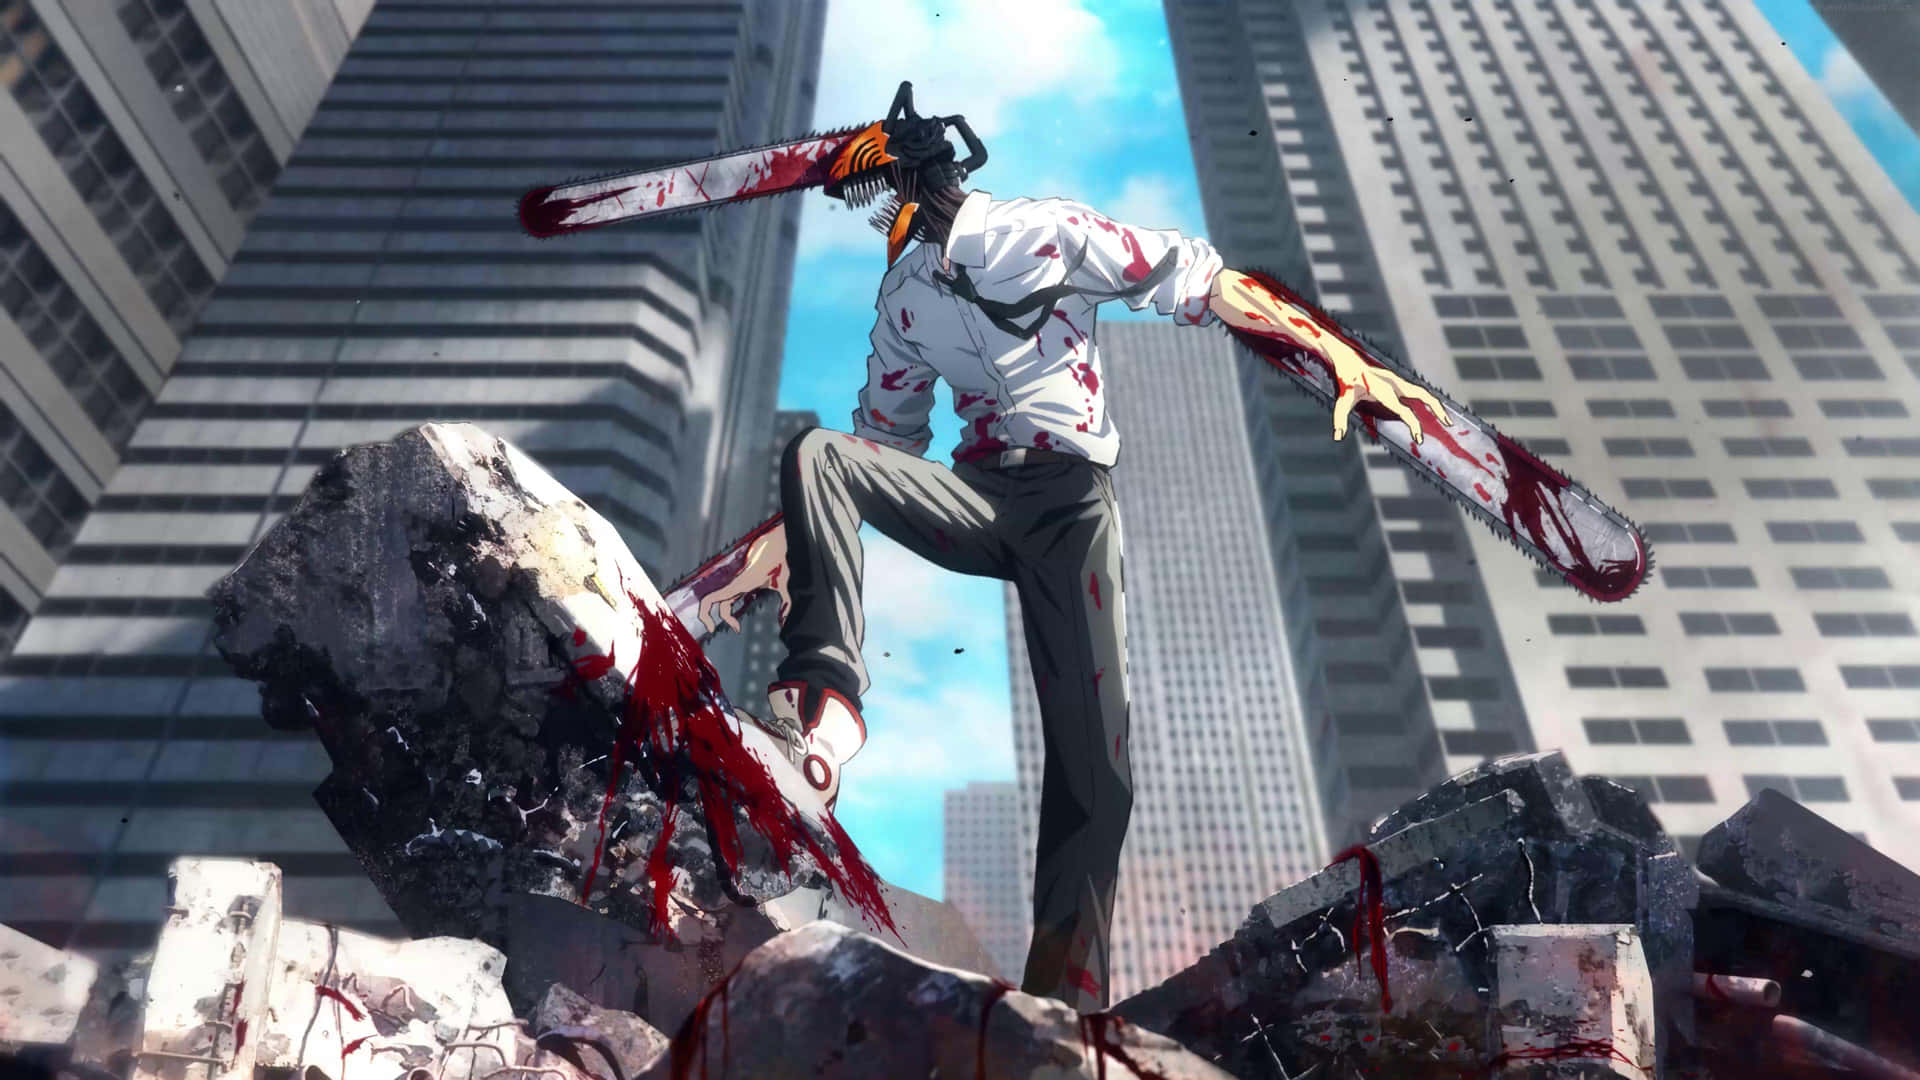 Anime Chainsaw Wielding Character Wallpaper